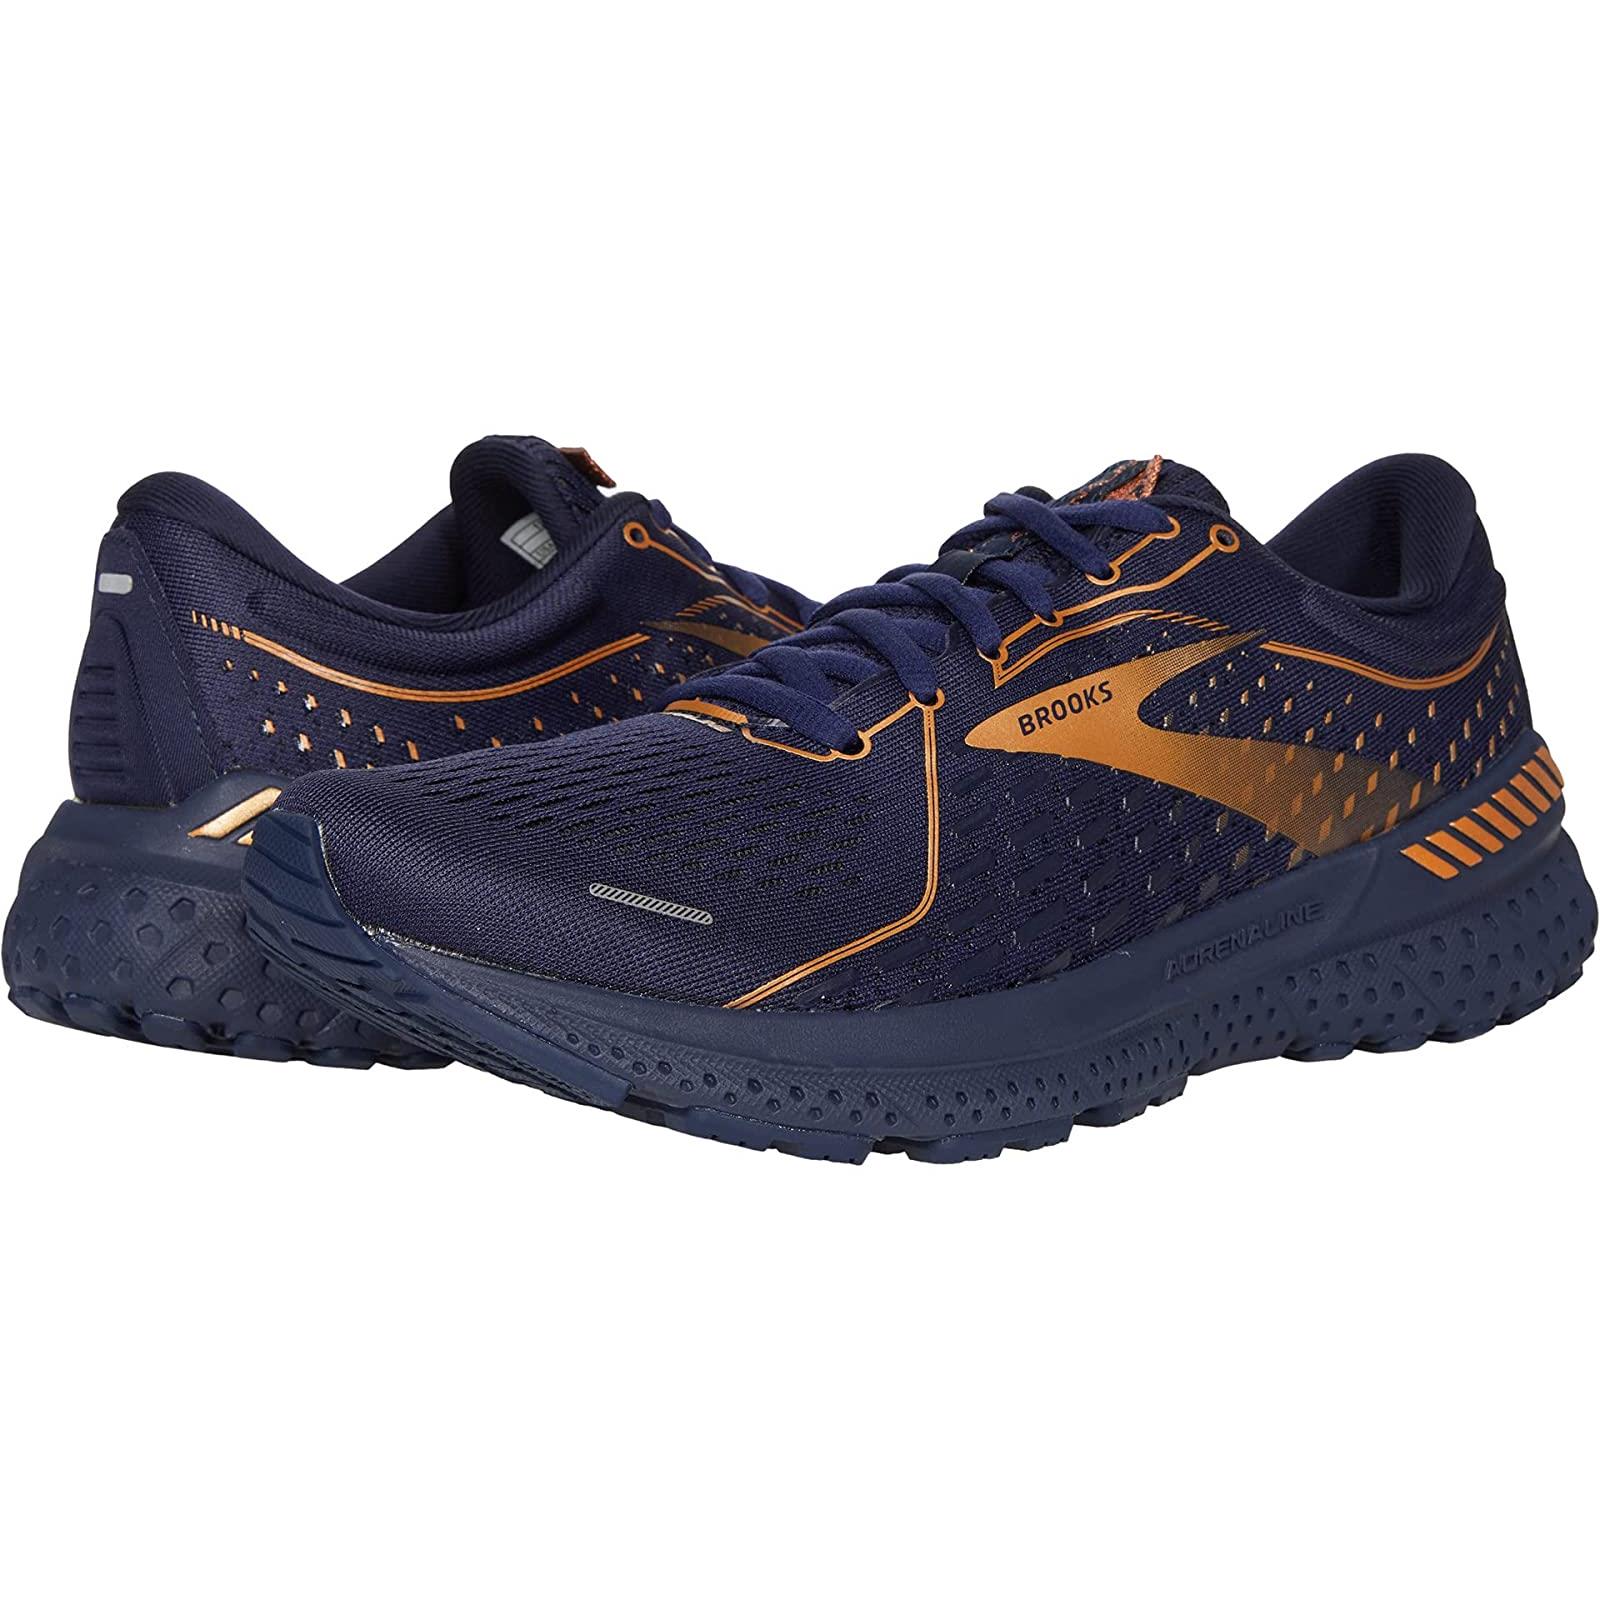 Woman`s Sneakers Athletic Shoes Brooks Adrenaline Gts 21 Navy/Black/Copper